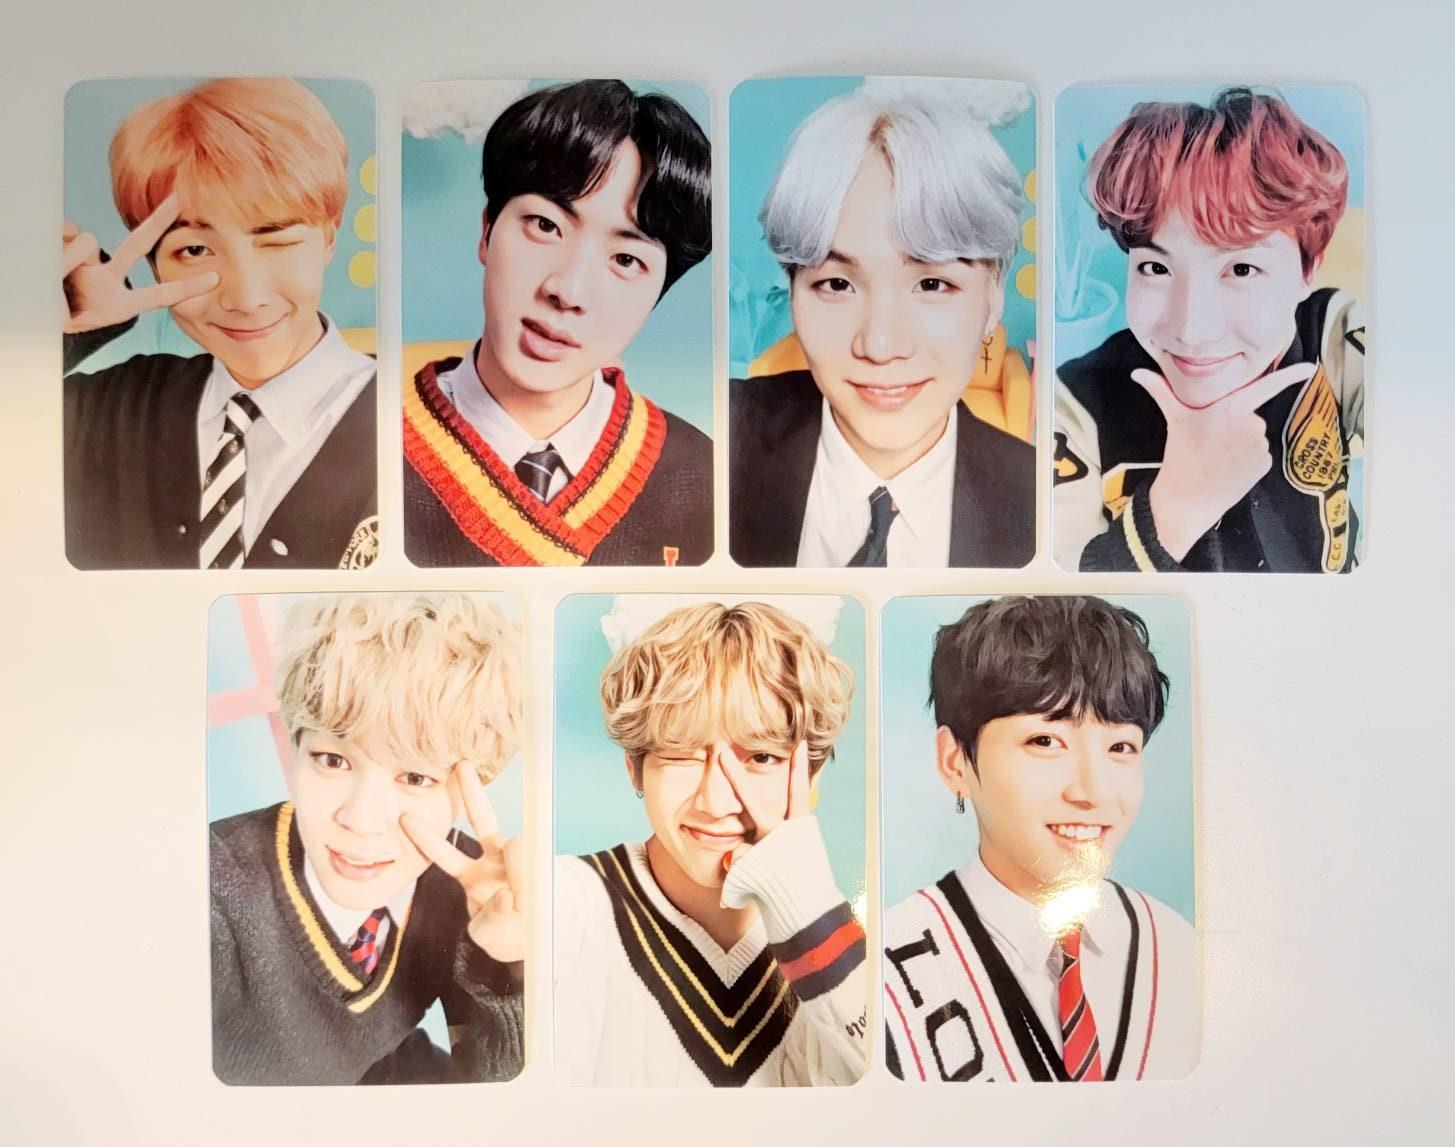 BTS 4th Muster Happy Ever After Binder Photocards